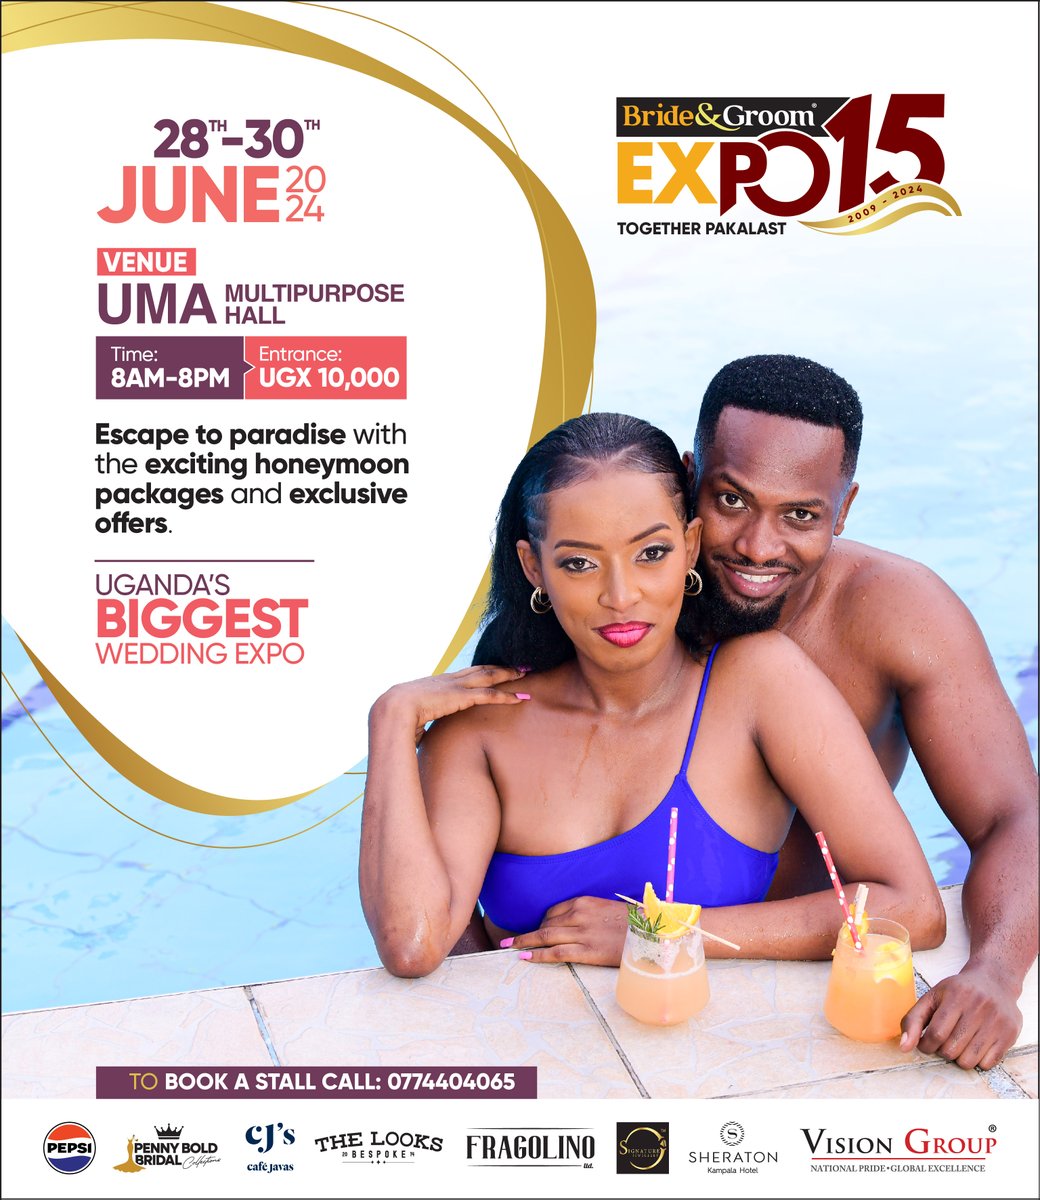 🎉 Don't miss the wedding event of the year! #TheBrideAndGroomExpo is back, #TogetherPakalast! Join us from June 28th-30th at UMA Multipurpose Hall Lugogo. Tickets are just sh10,000, so secure yours now for an unforgettable experience! 💍✨ #VisionUpdates